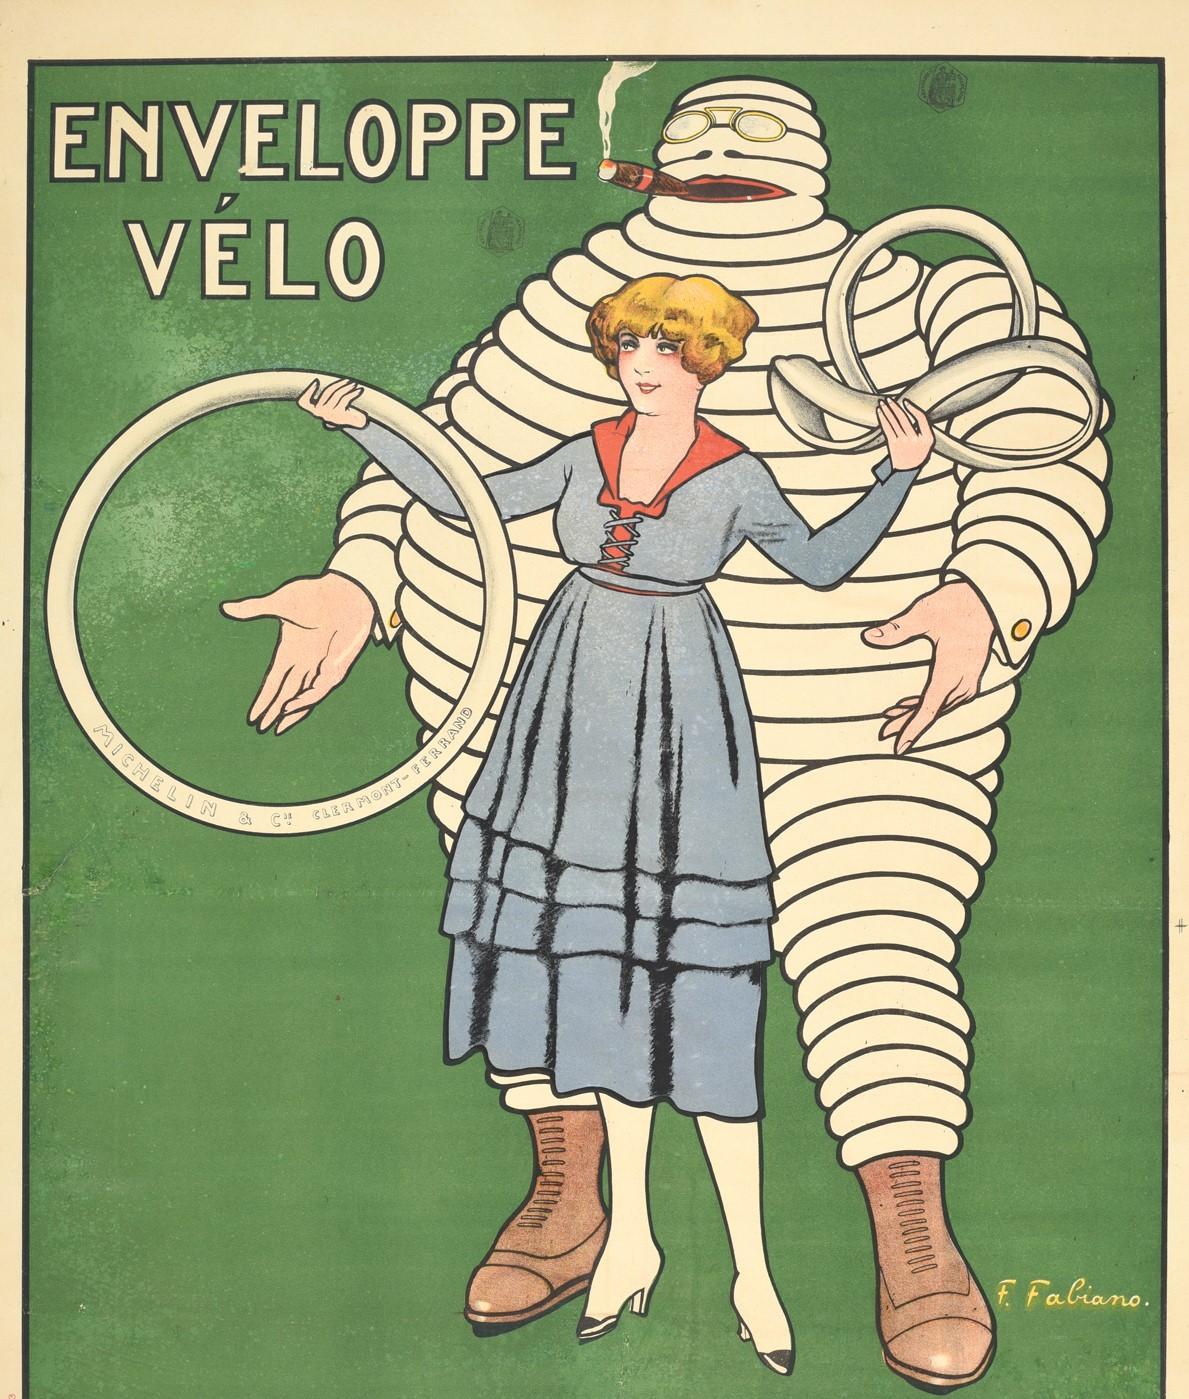 Original antique Michelin poster advertising bicycle tyres - Enveloppe Velo Michelin - featuring a great design by Fabien Fabiano (1882-1962) depicting the Bibendum / Michelin Man character made out of white tyres and smoking a cigar and wearing